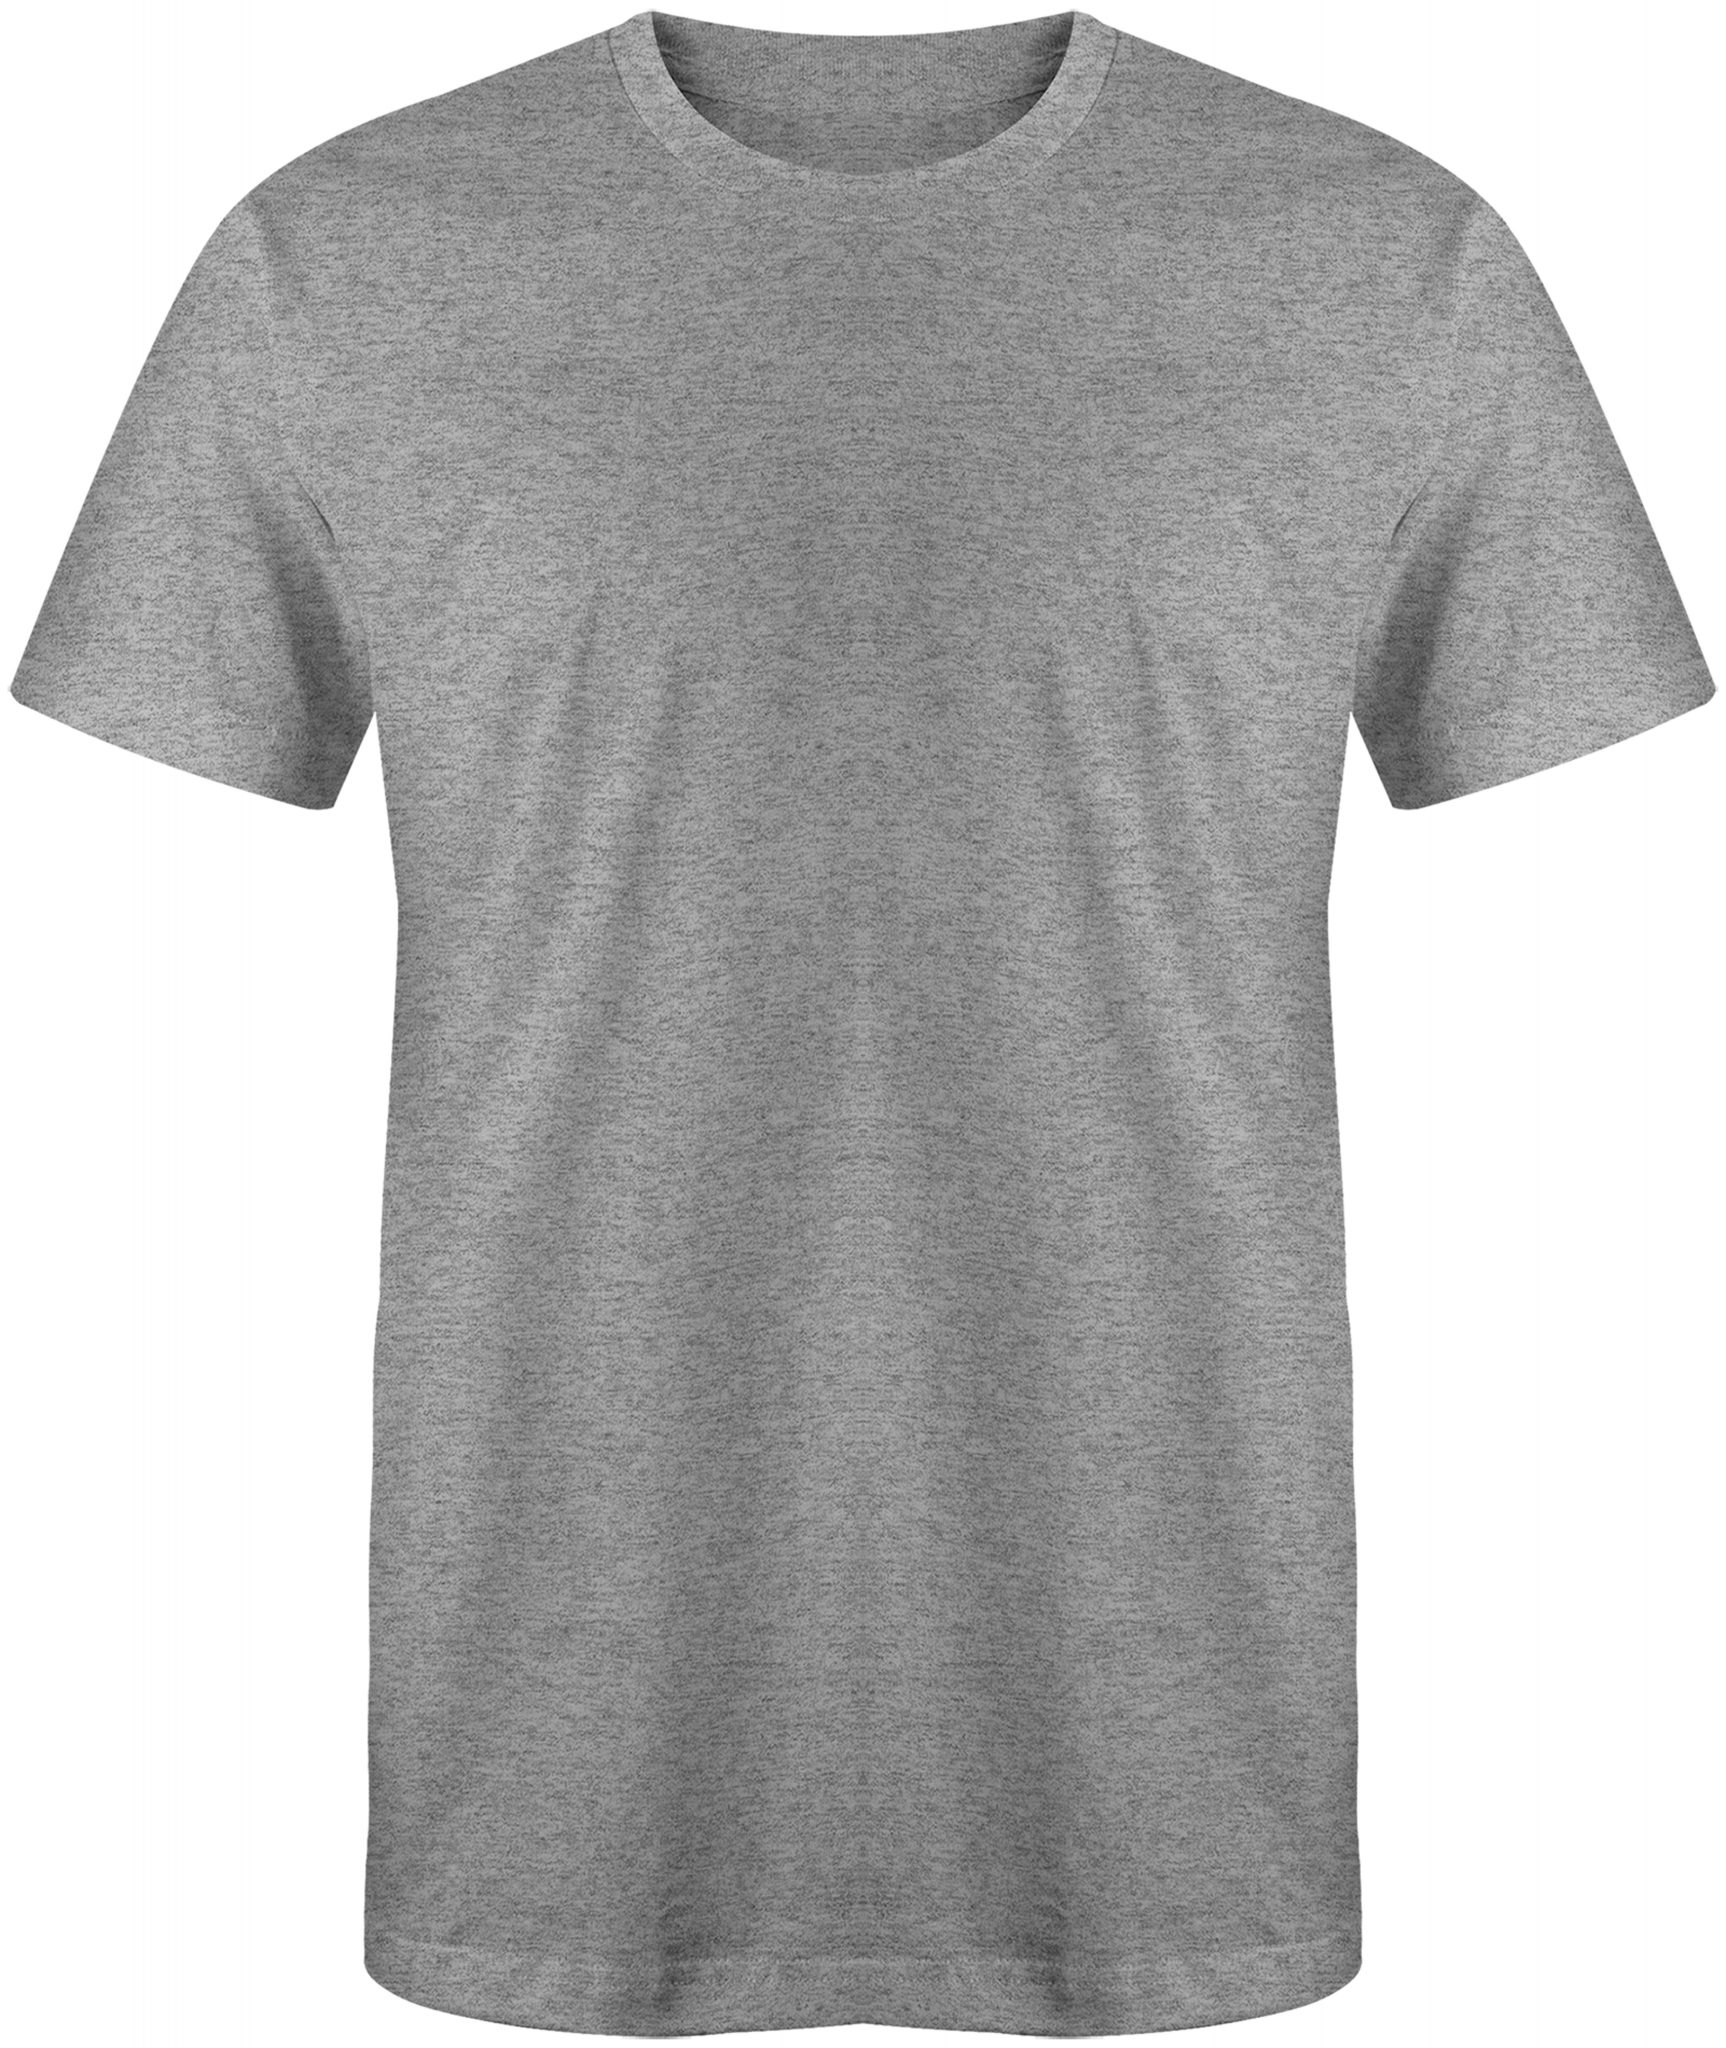 Blank t shirt heather grey color in front view isolated on white ...